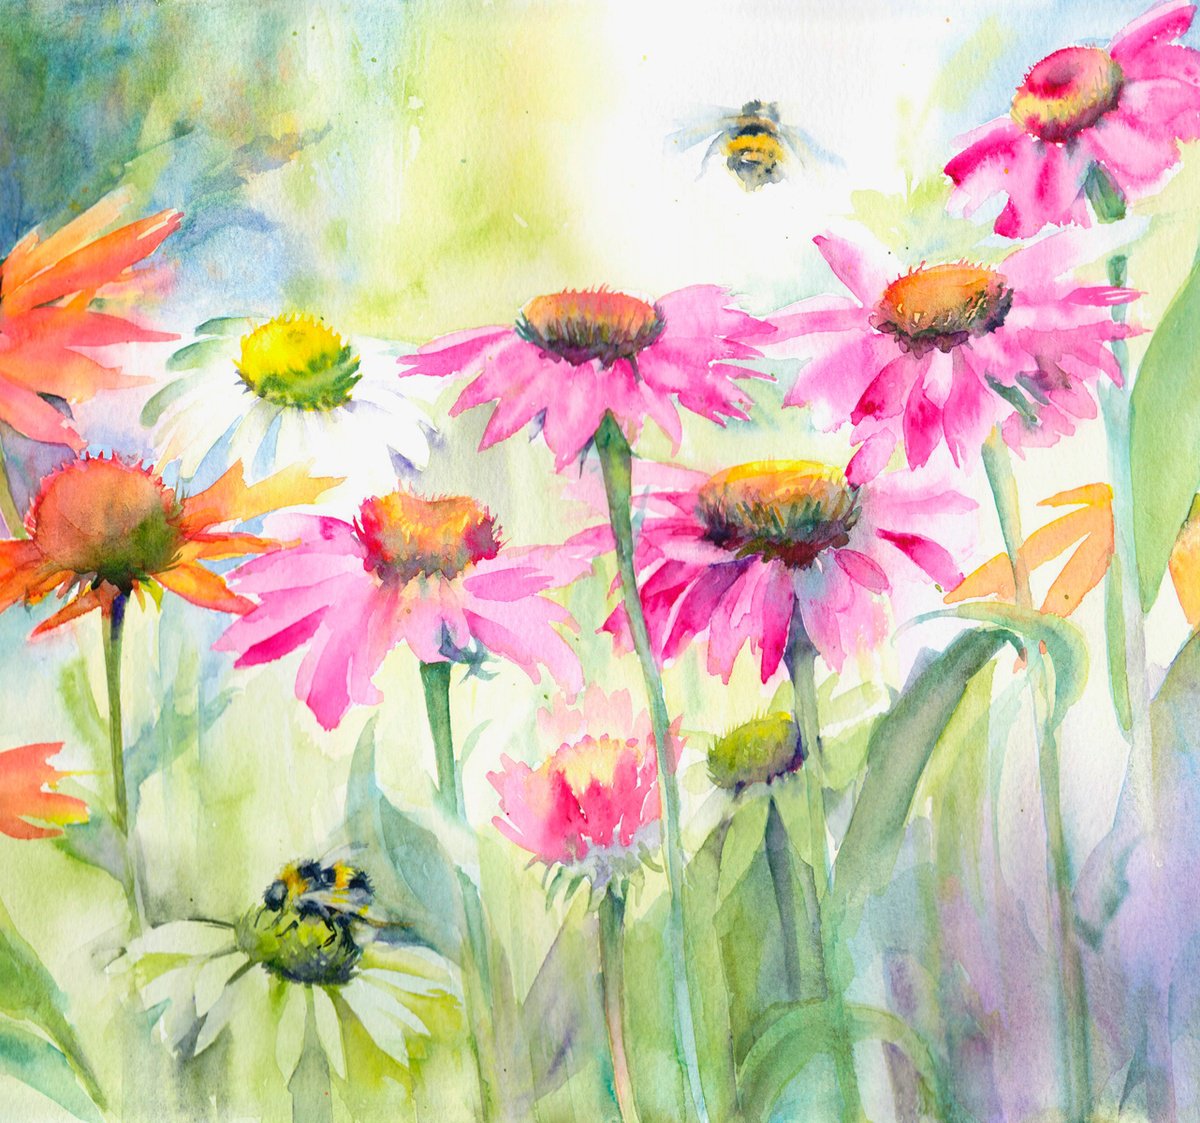 Bees & Echinaceas, Original watercolour painting by Anjana Cawdell